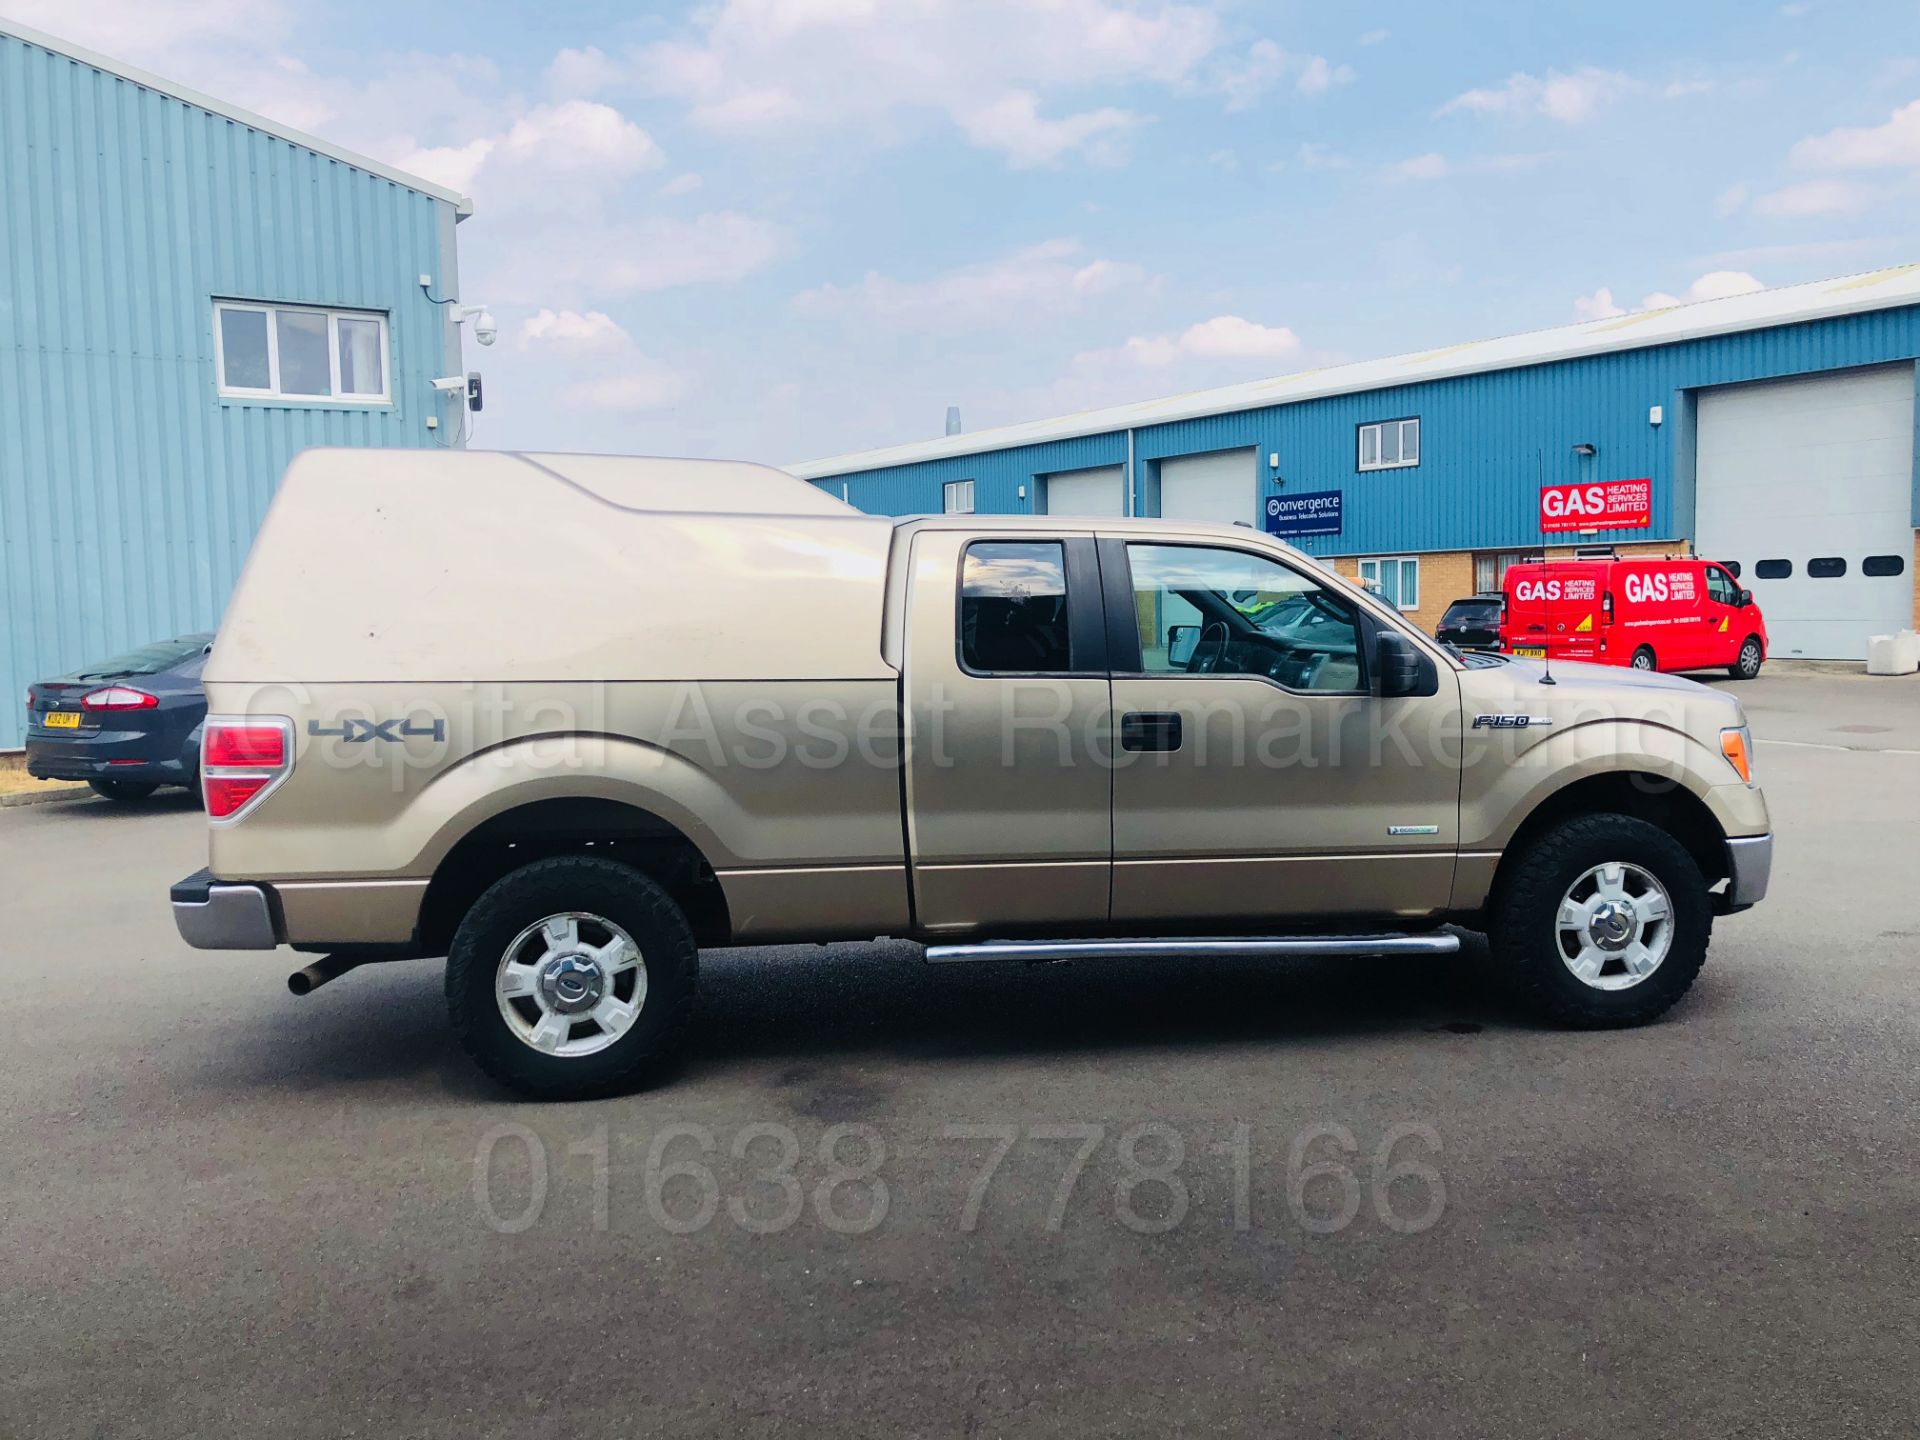 (On Sale) FORD F-150 5.4 V8 XLT EDITION KING-CAB (2012) MODEL**4X4**6 SEATER**AUTOMATIC *TOP SPEC* - Image 13 of 52